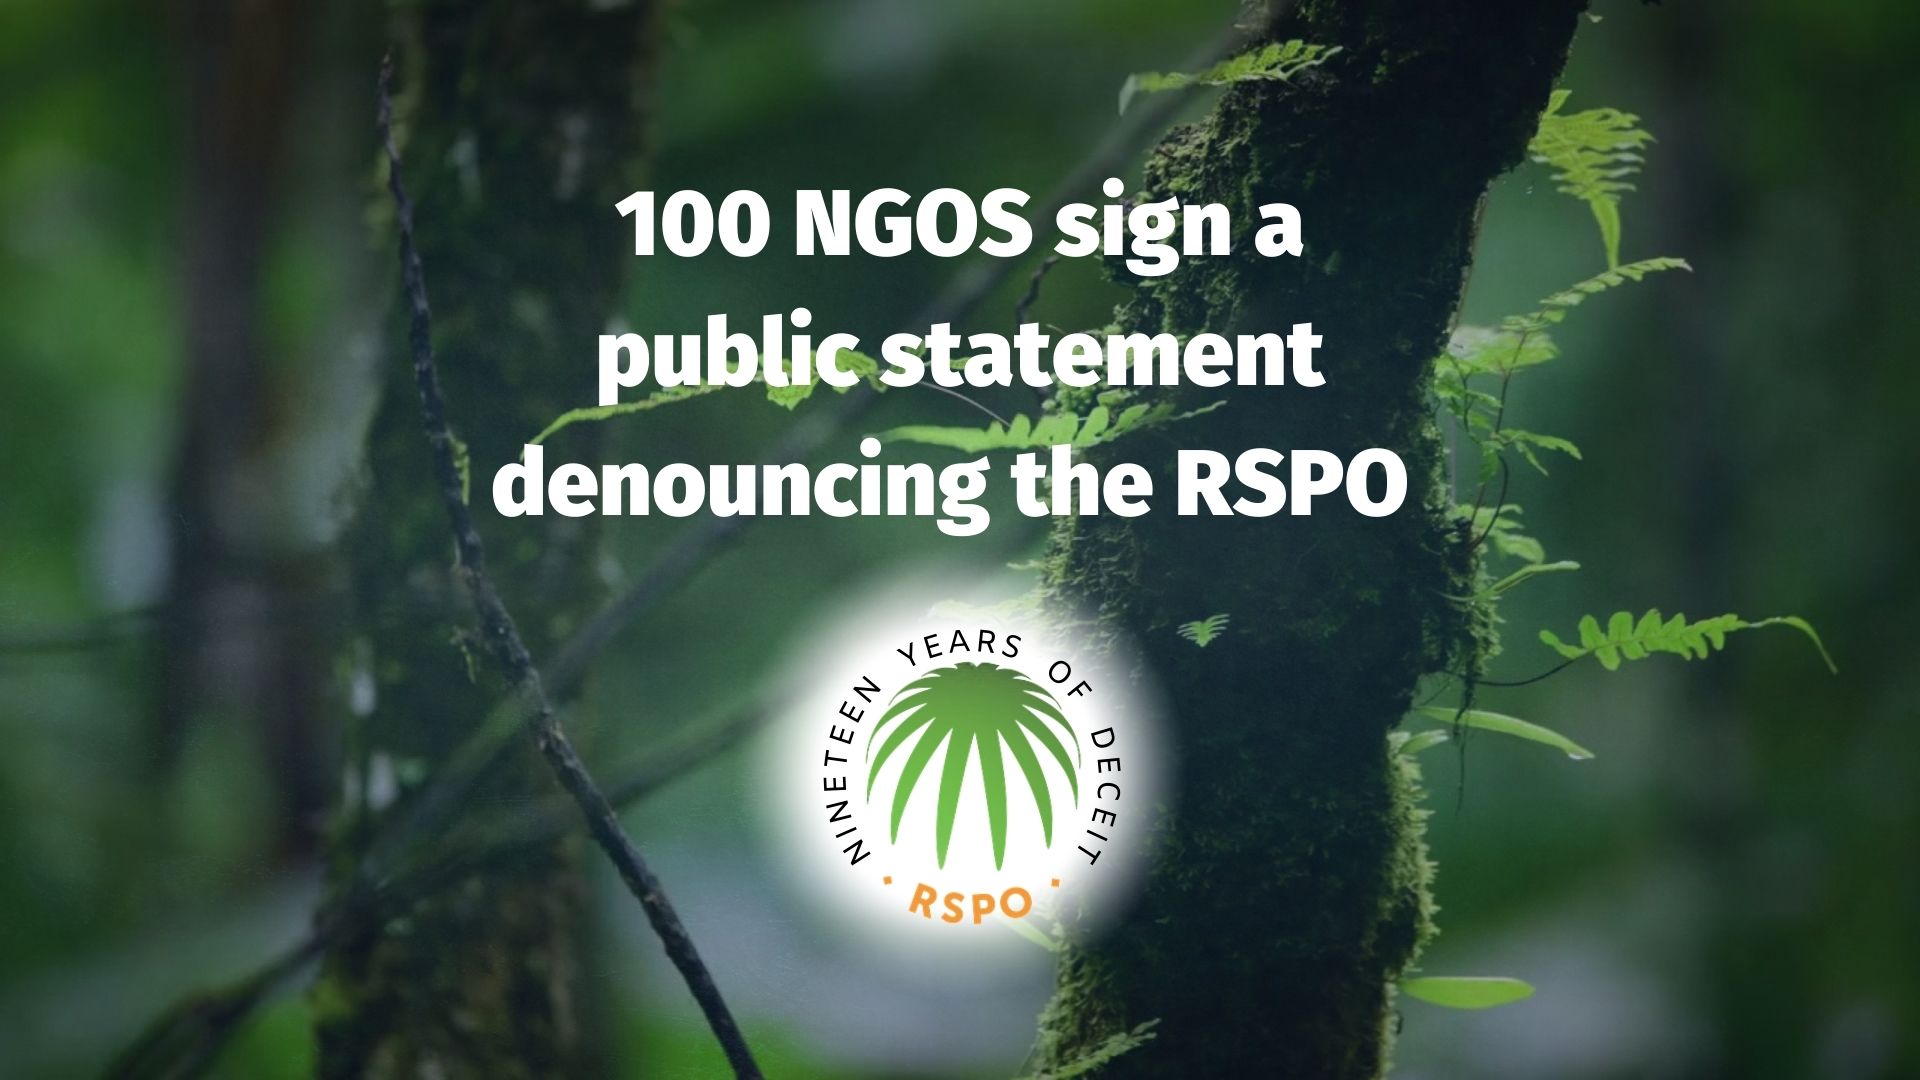 100 NGOS sign a public statement denouncing the RSPO and "sustainable" palm oil as a fake solution that does not stop deforestation